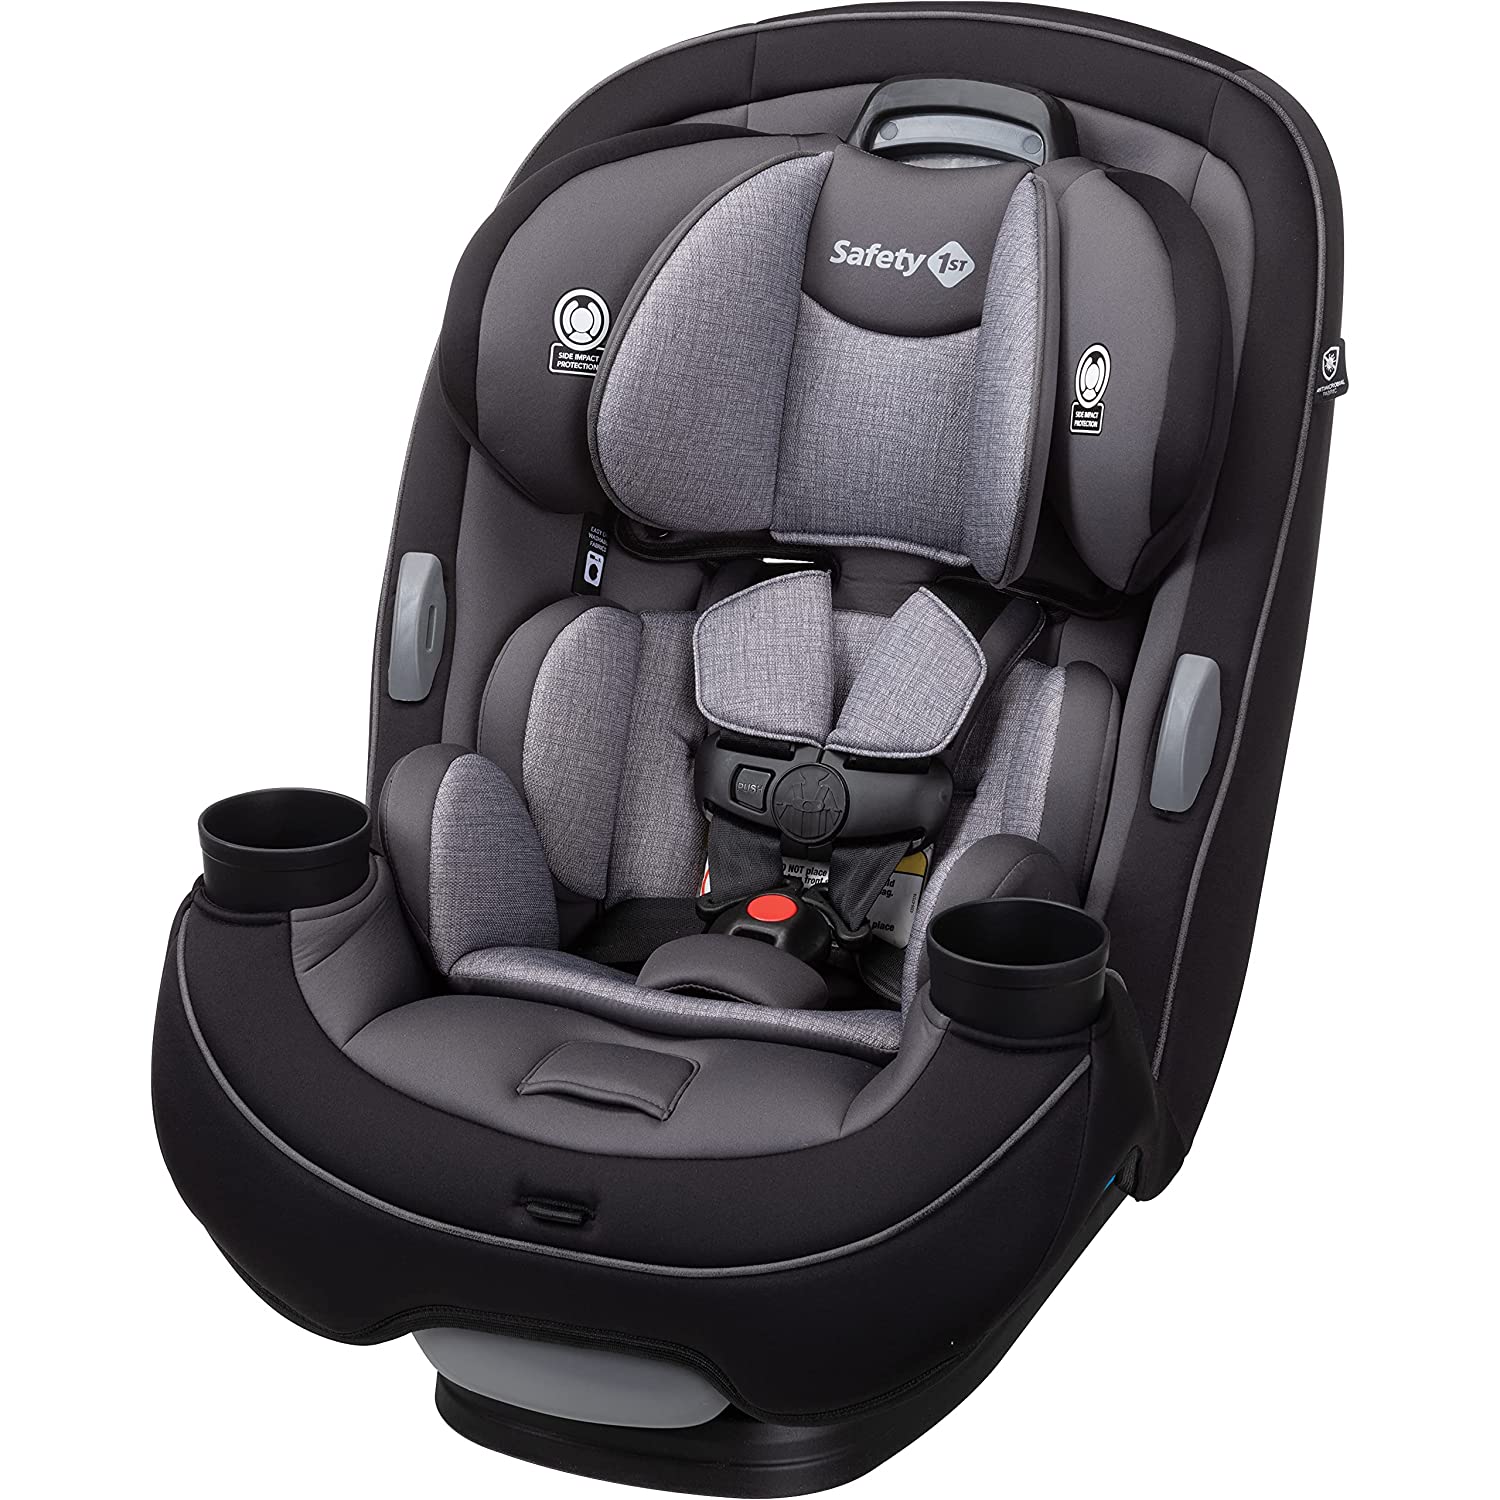 safety1st-grow-and-go-all-in-one-convertible-car-seat